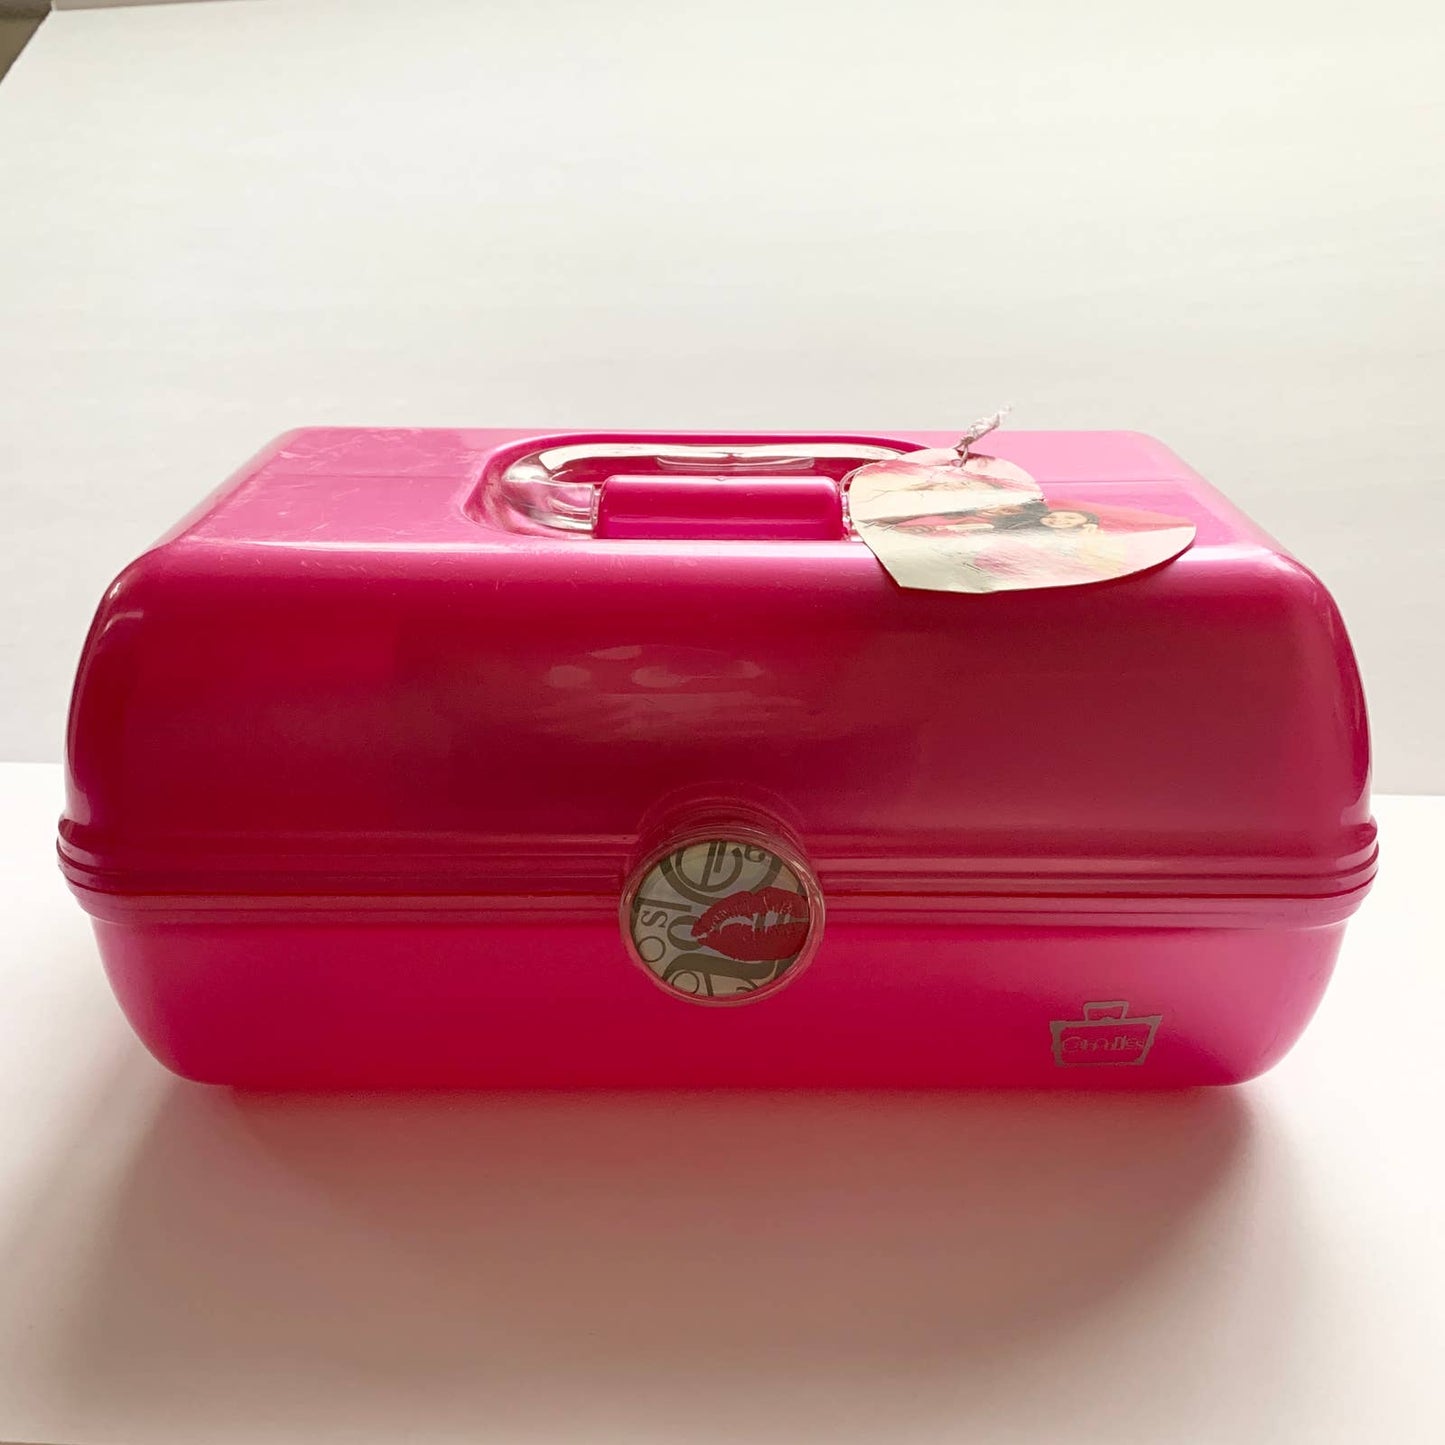 Caboodles On the Go Simone Biles 2017 Pink Cosmetic Case